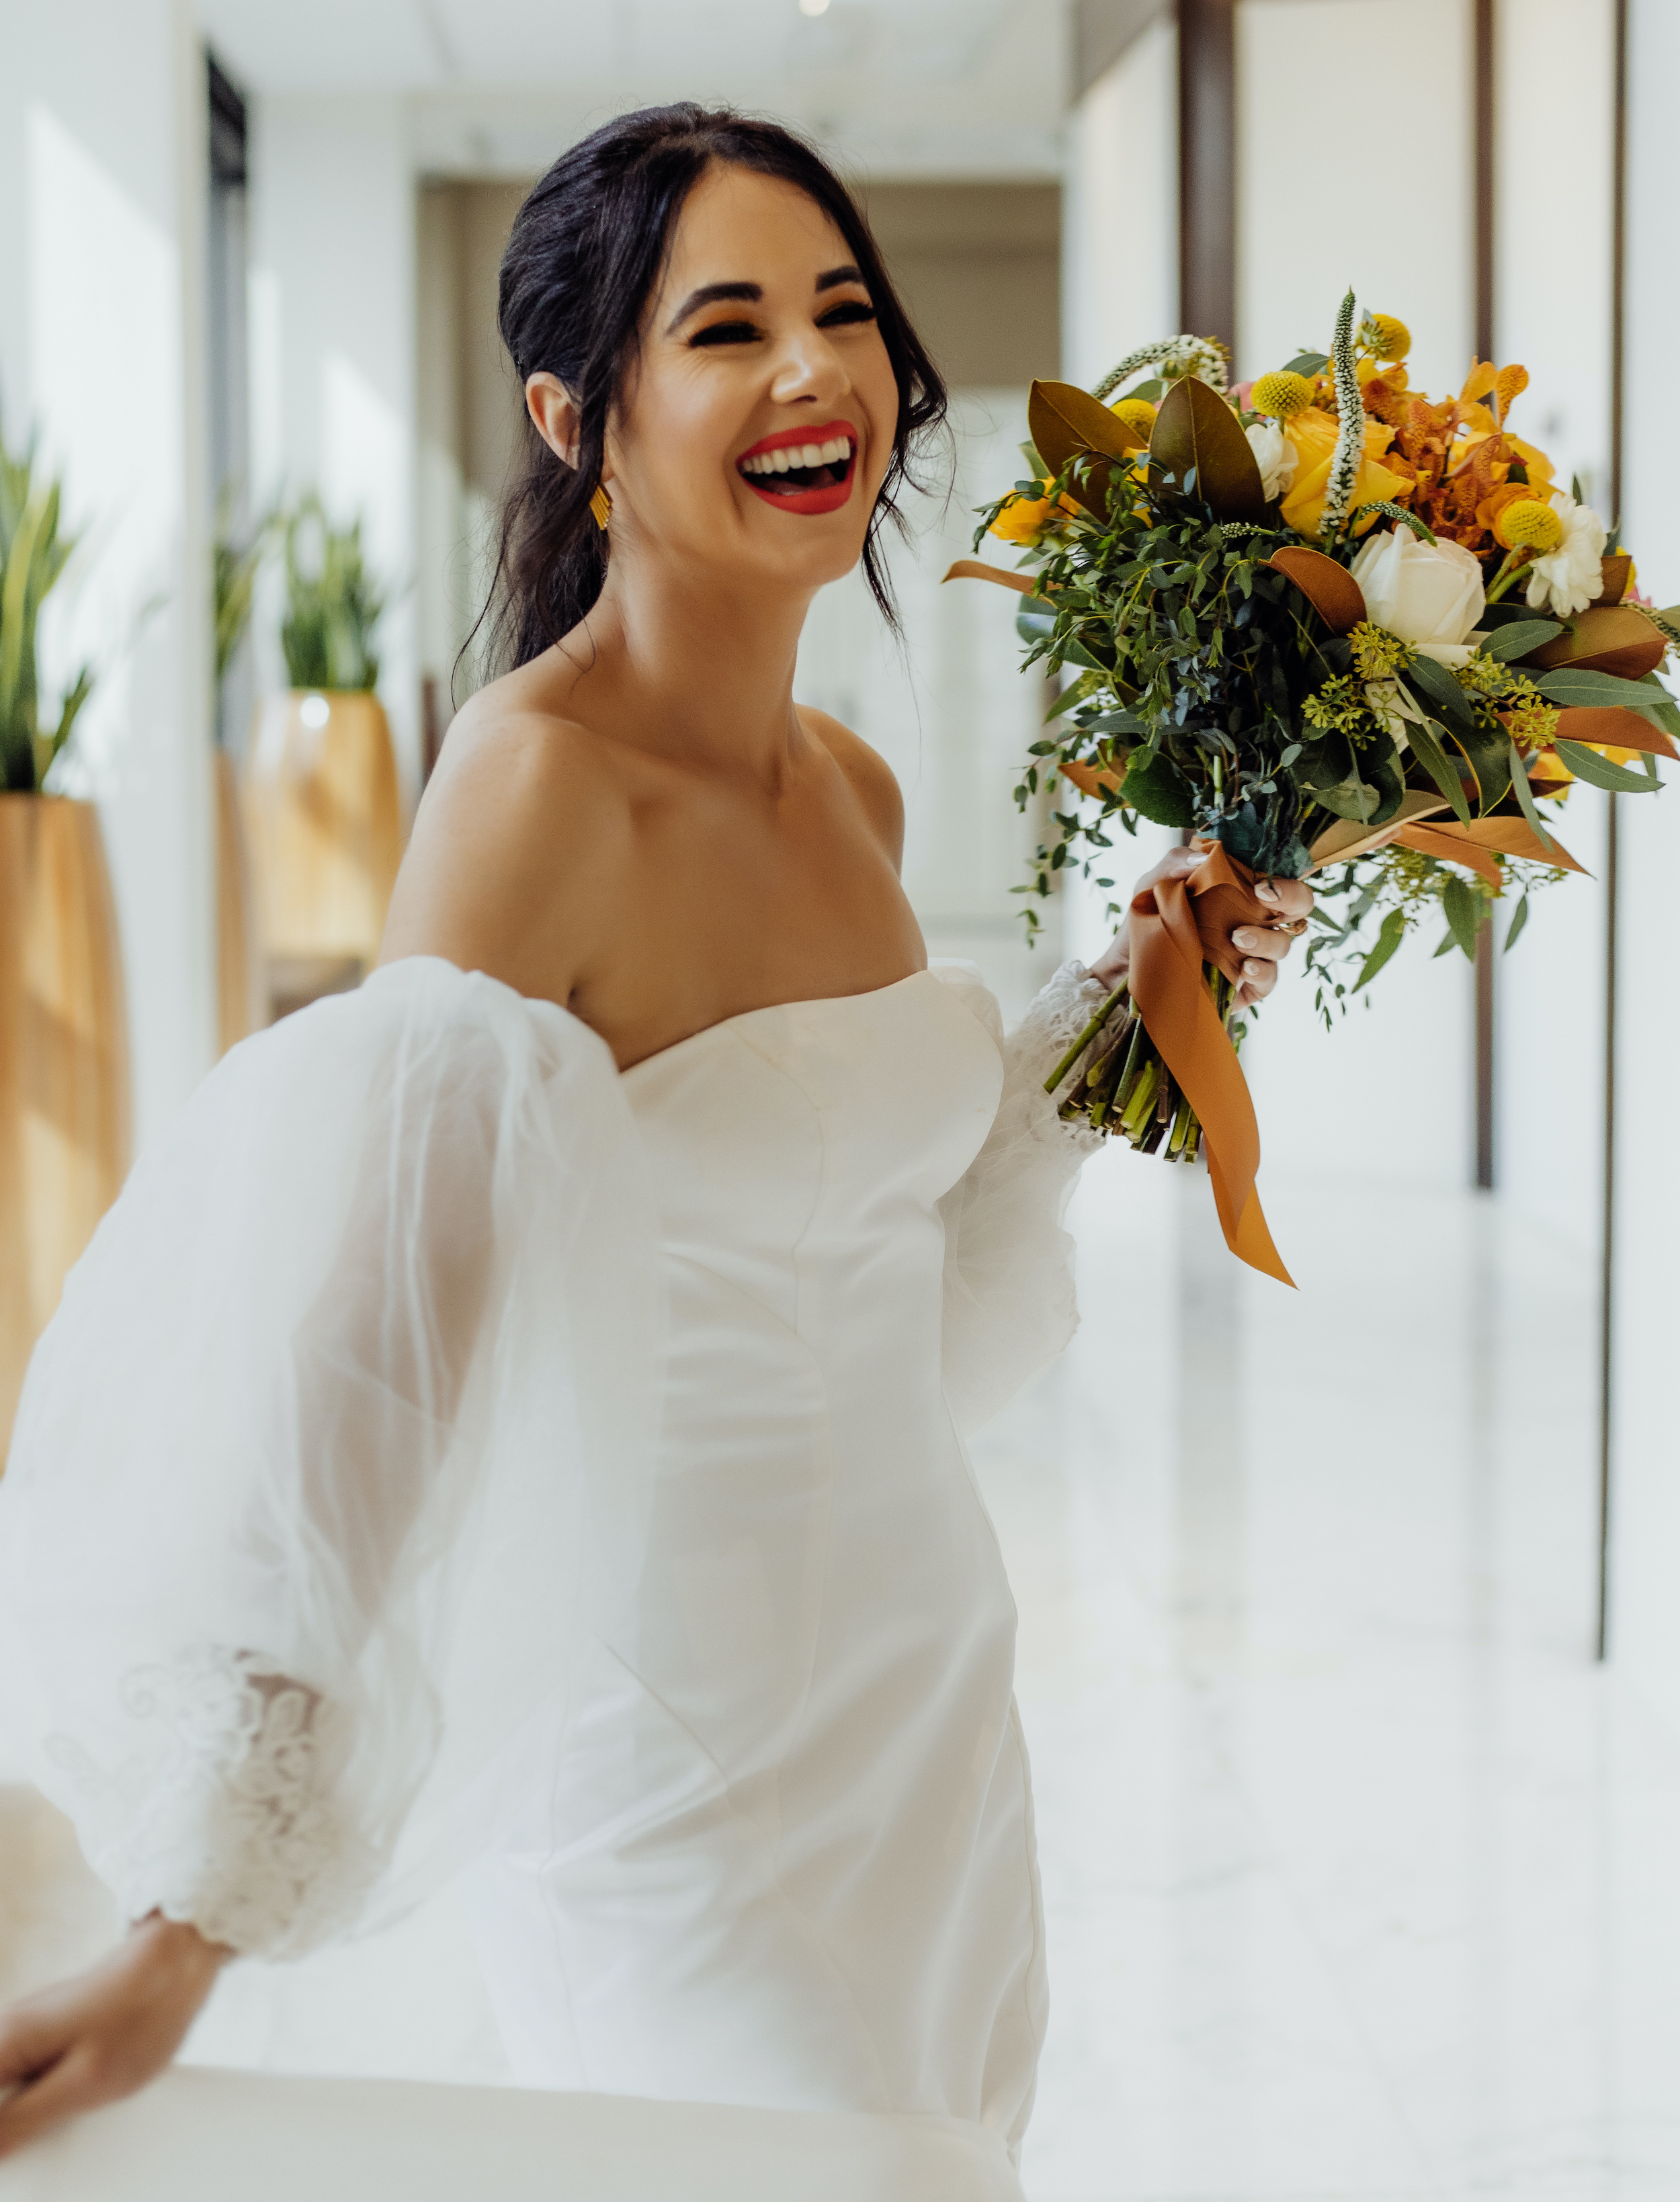 The bride laughs and holds her bouquet near her face at The Whitehall in Houston, TX.